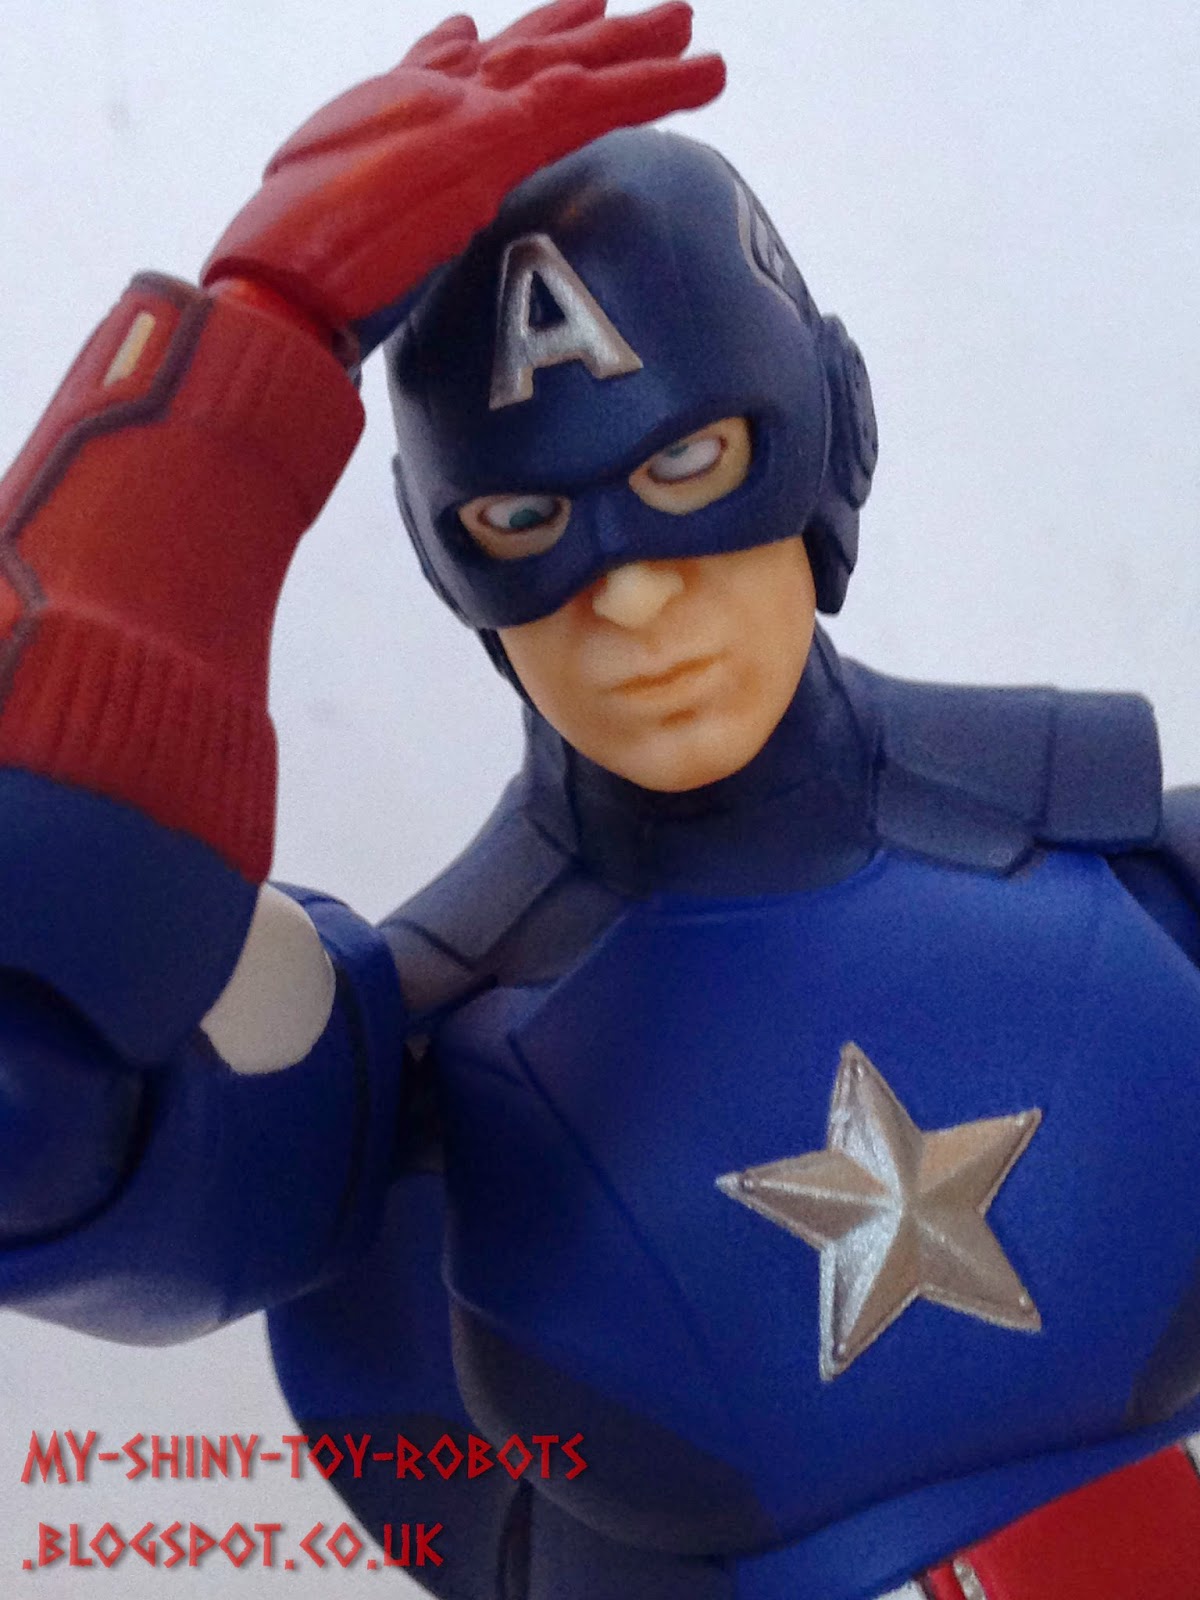 Messing around with Cap's eyes